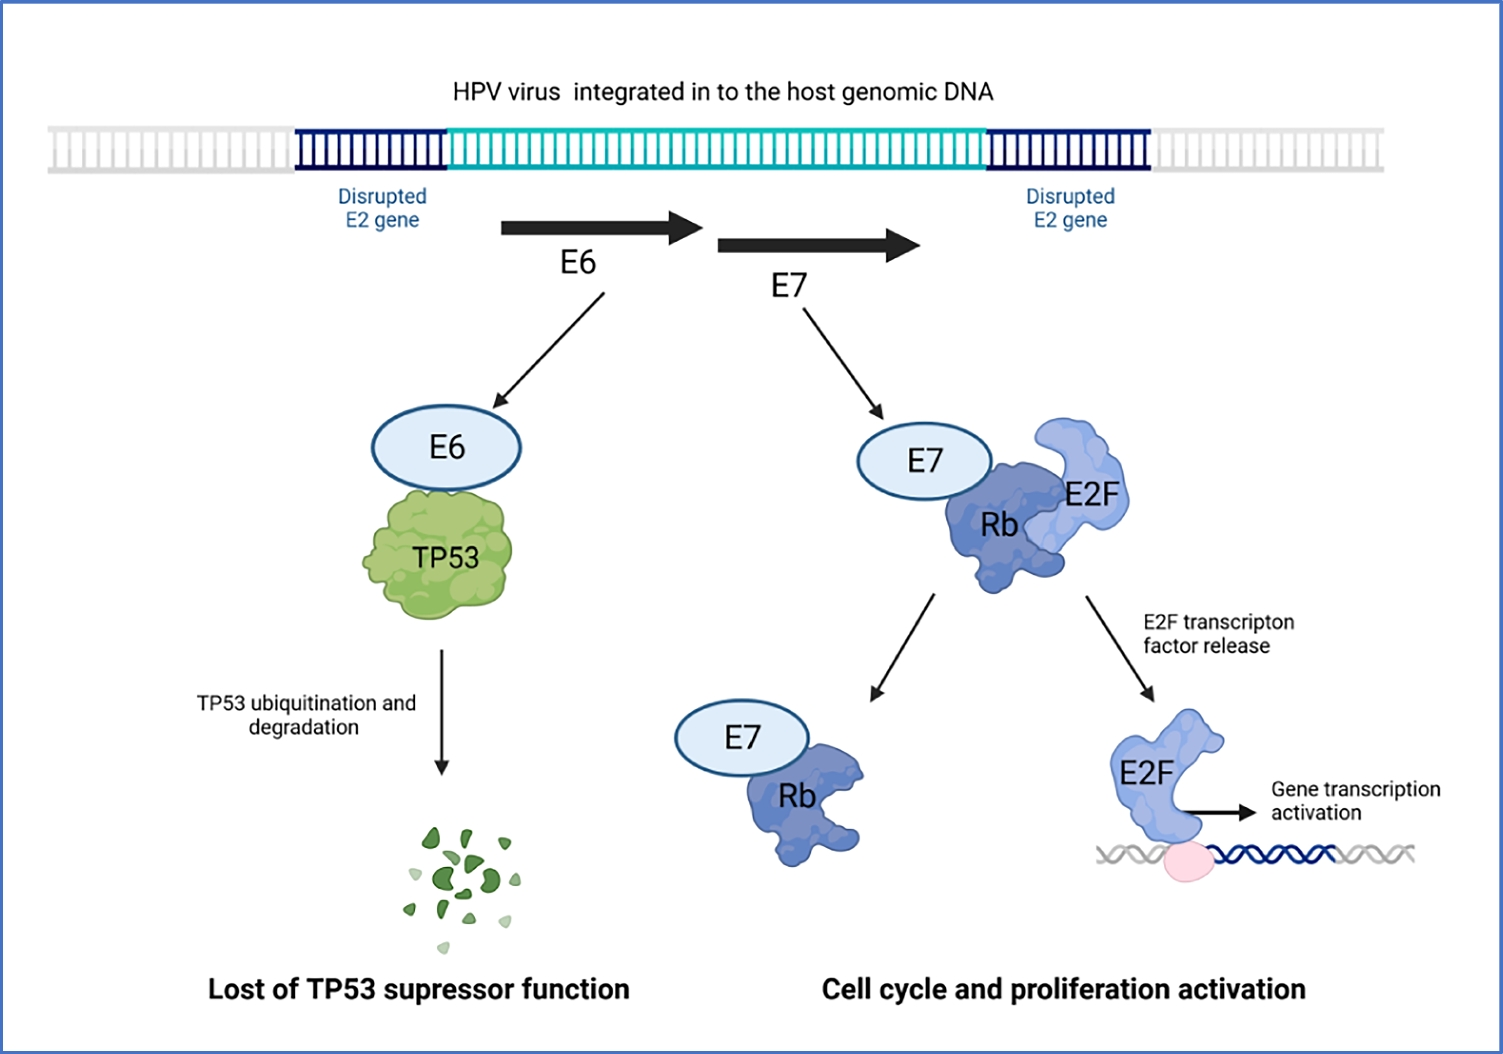 HPV-driven oncogenesis—much more than the E6 and E7 oncoproteins